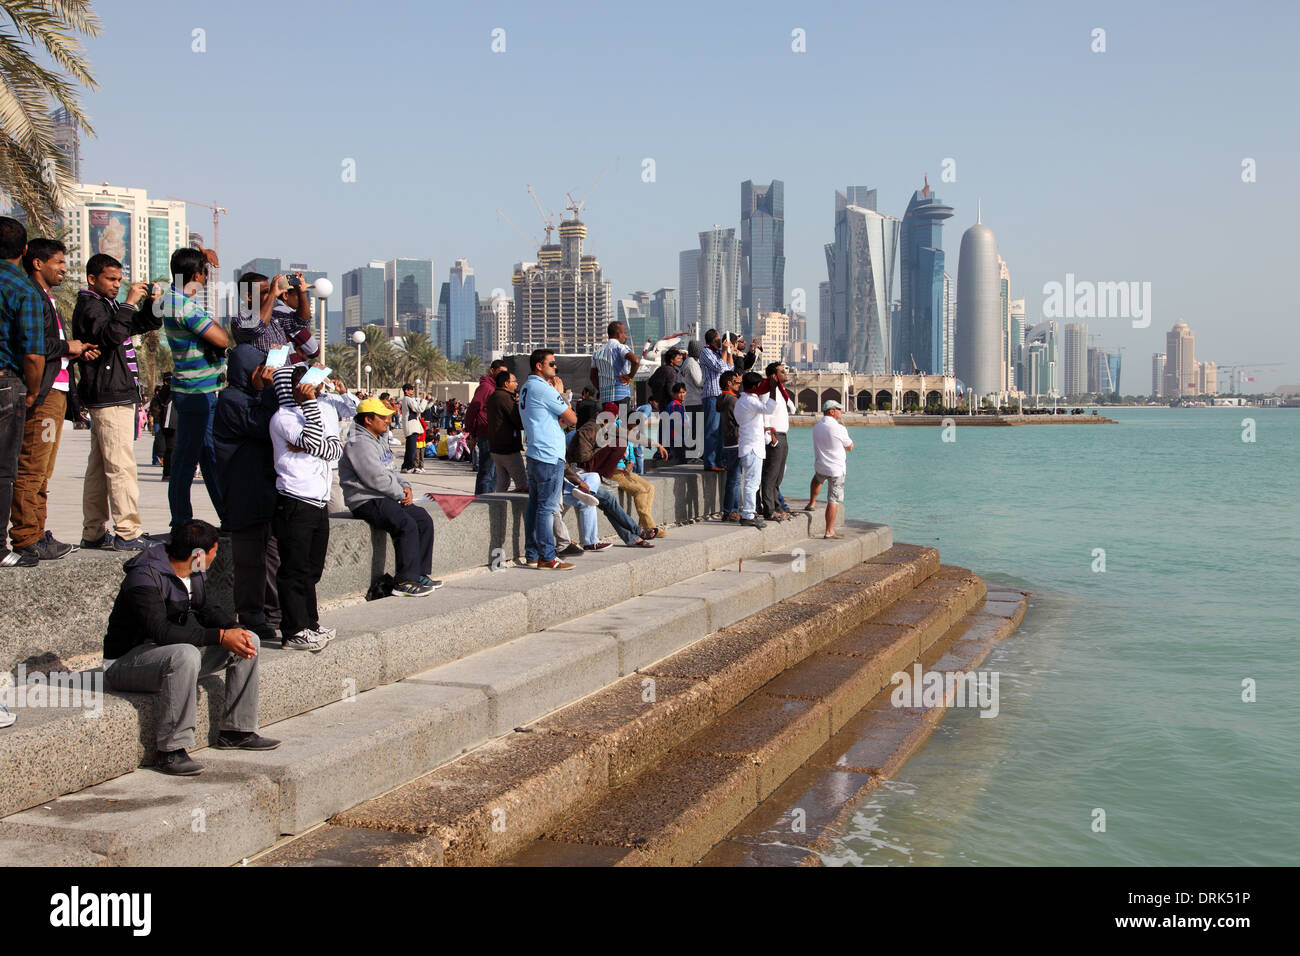 Spectators watching the Qatar National Day Air Show from the Corniche. December 18th 2013 in Doha, Qatar, Middle East Stock Photo